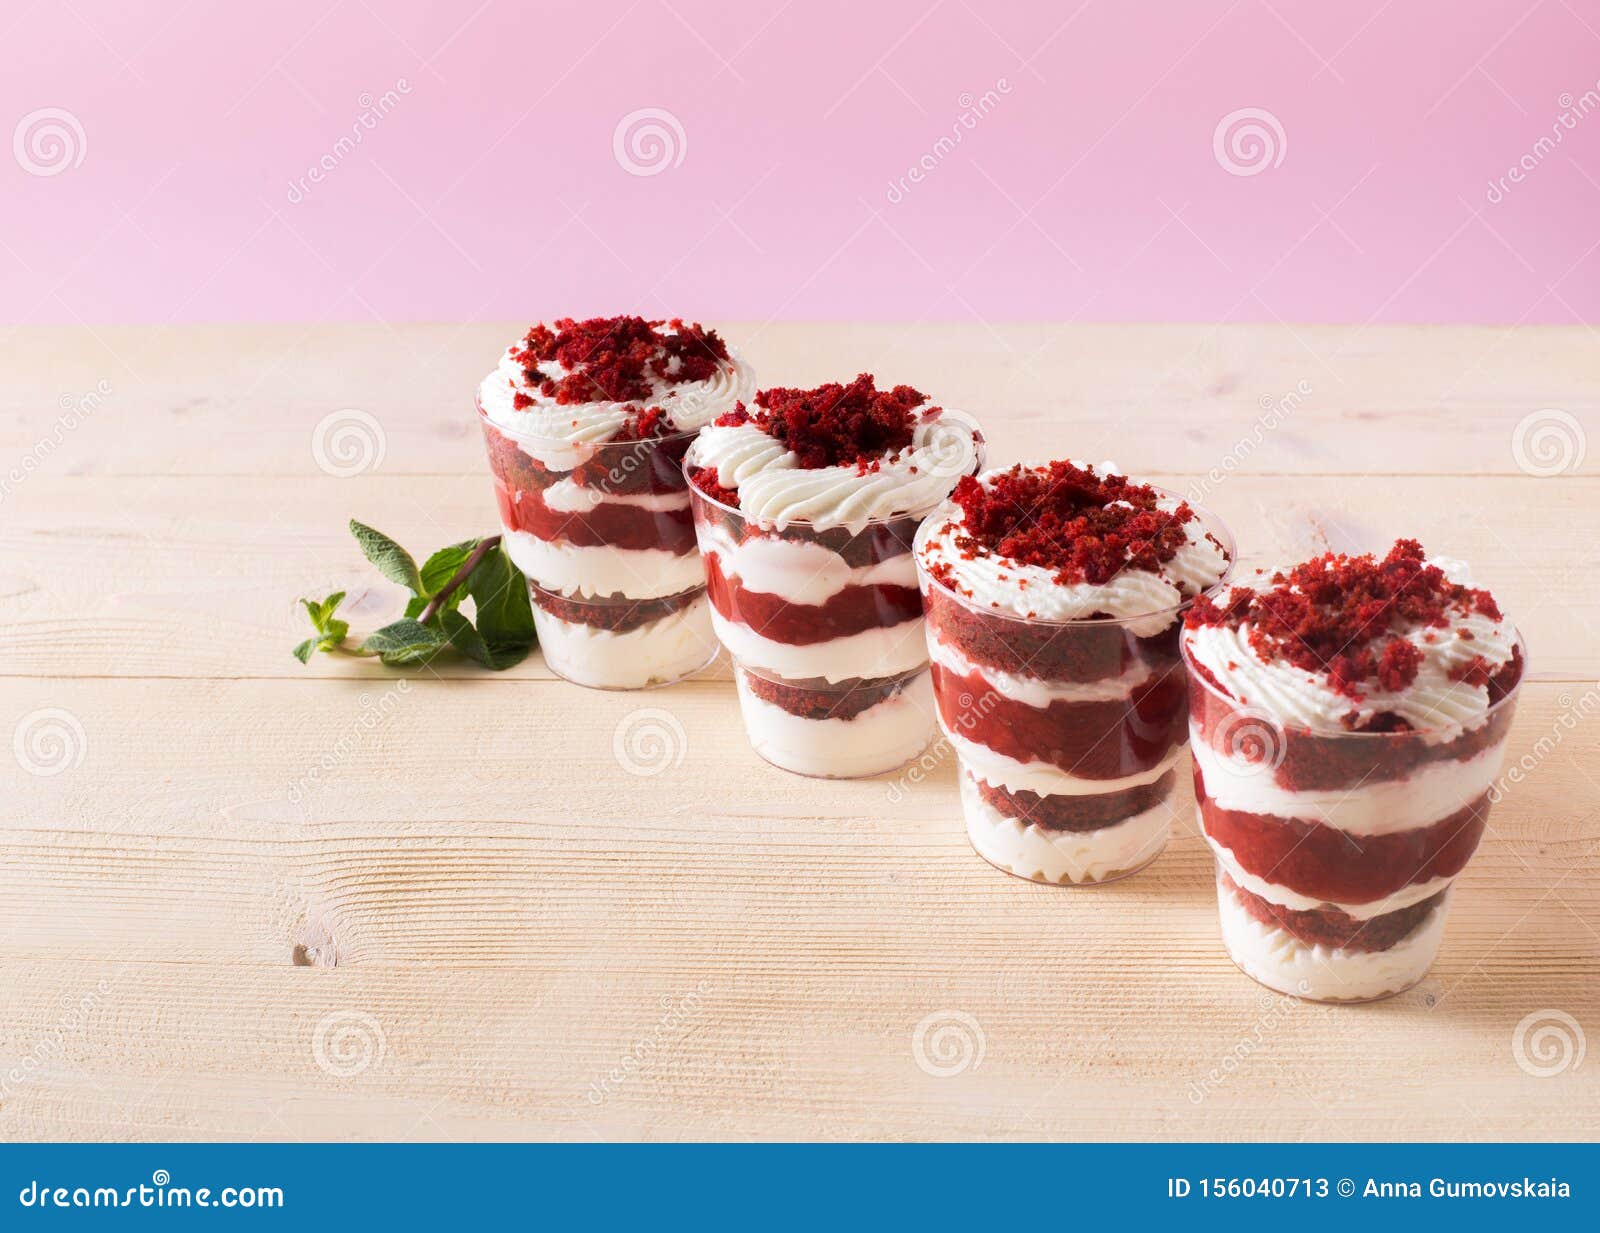 Homemade Cake Trifle on Pink Background Stock Image - of holiday, 156040713